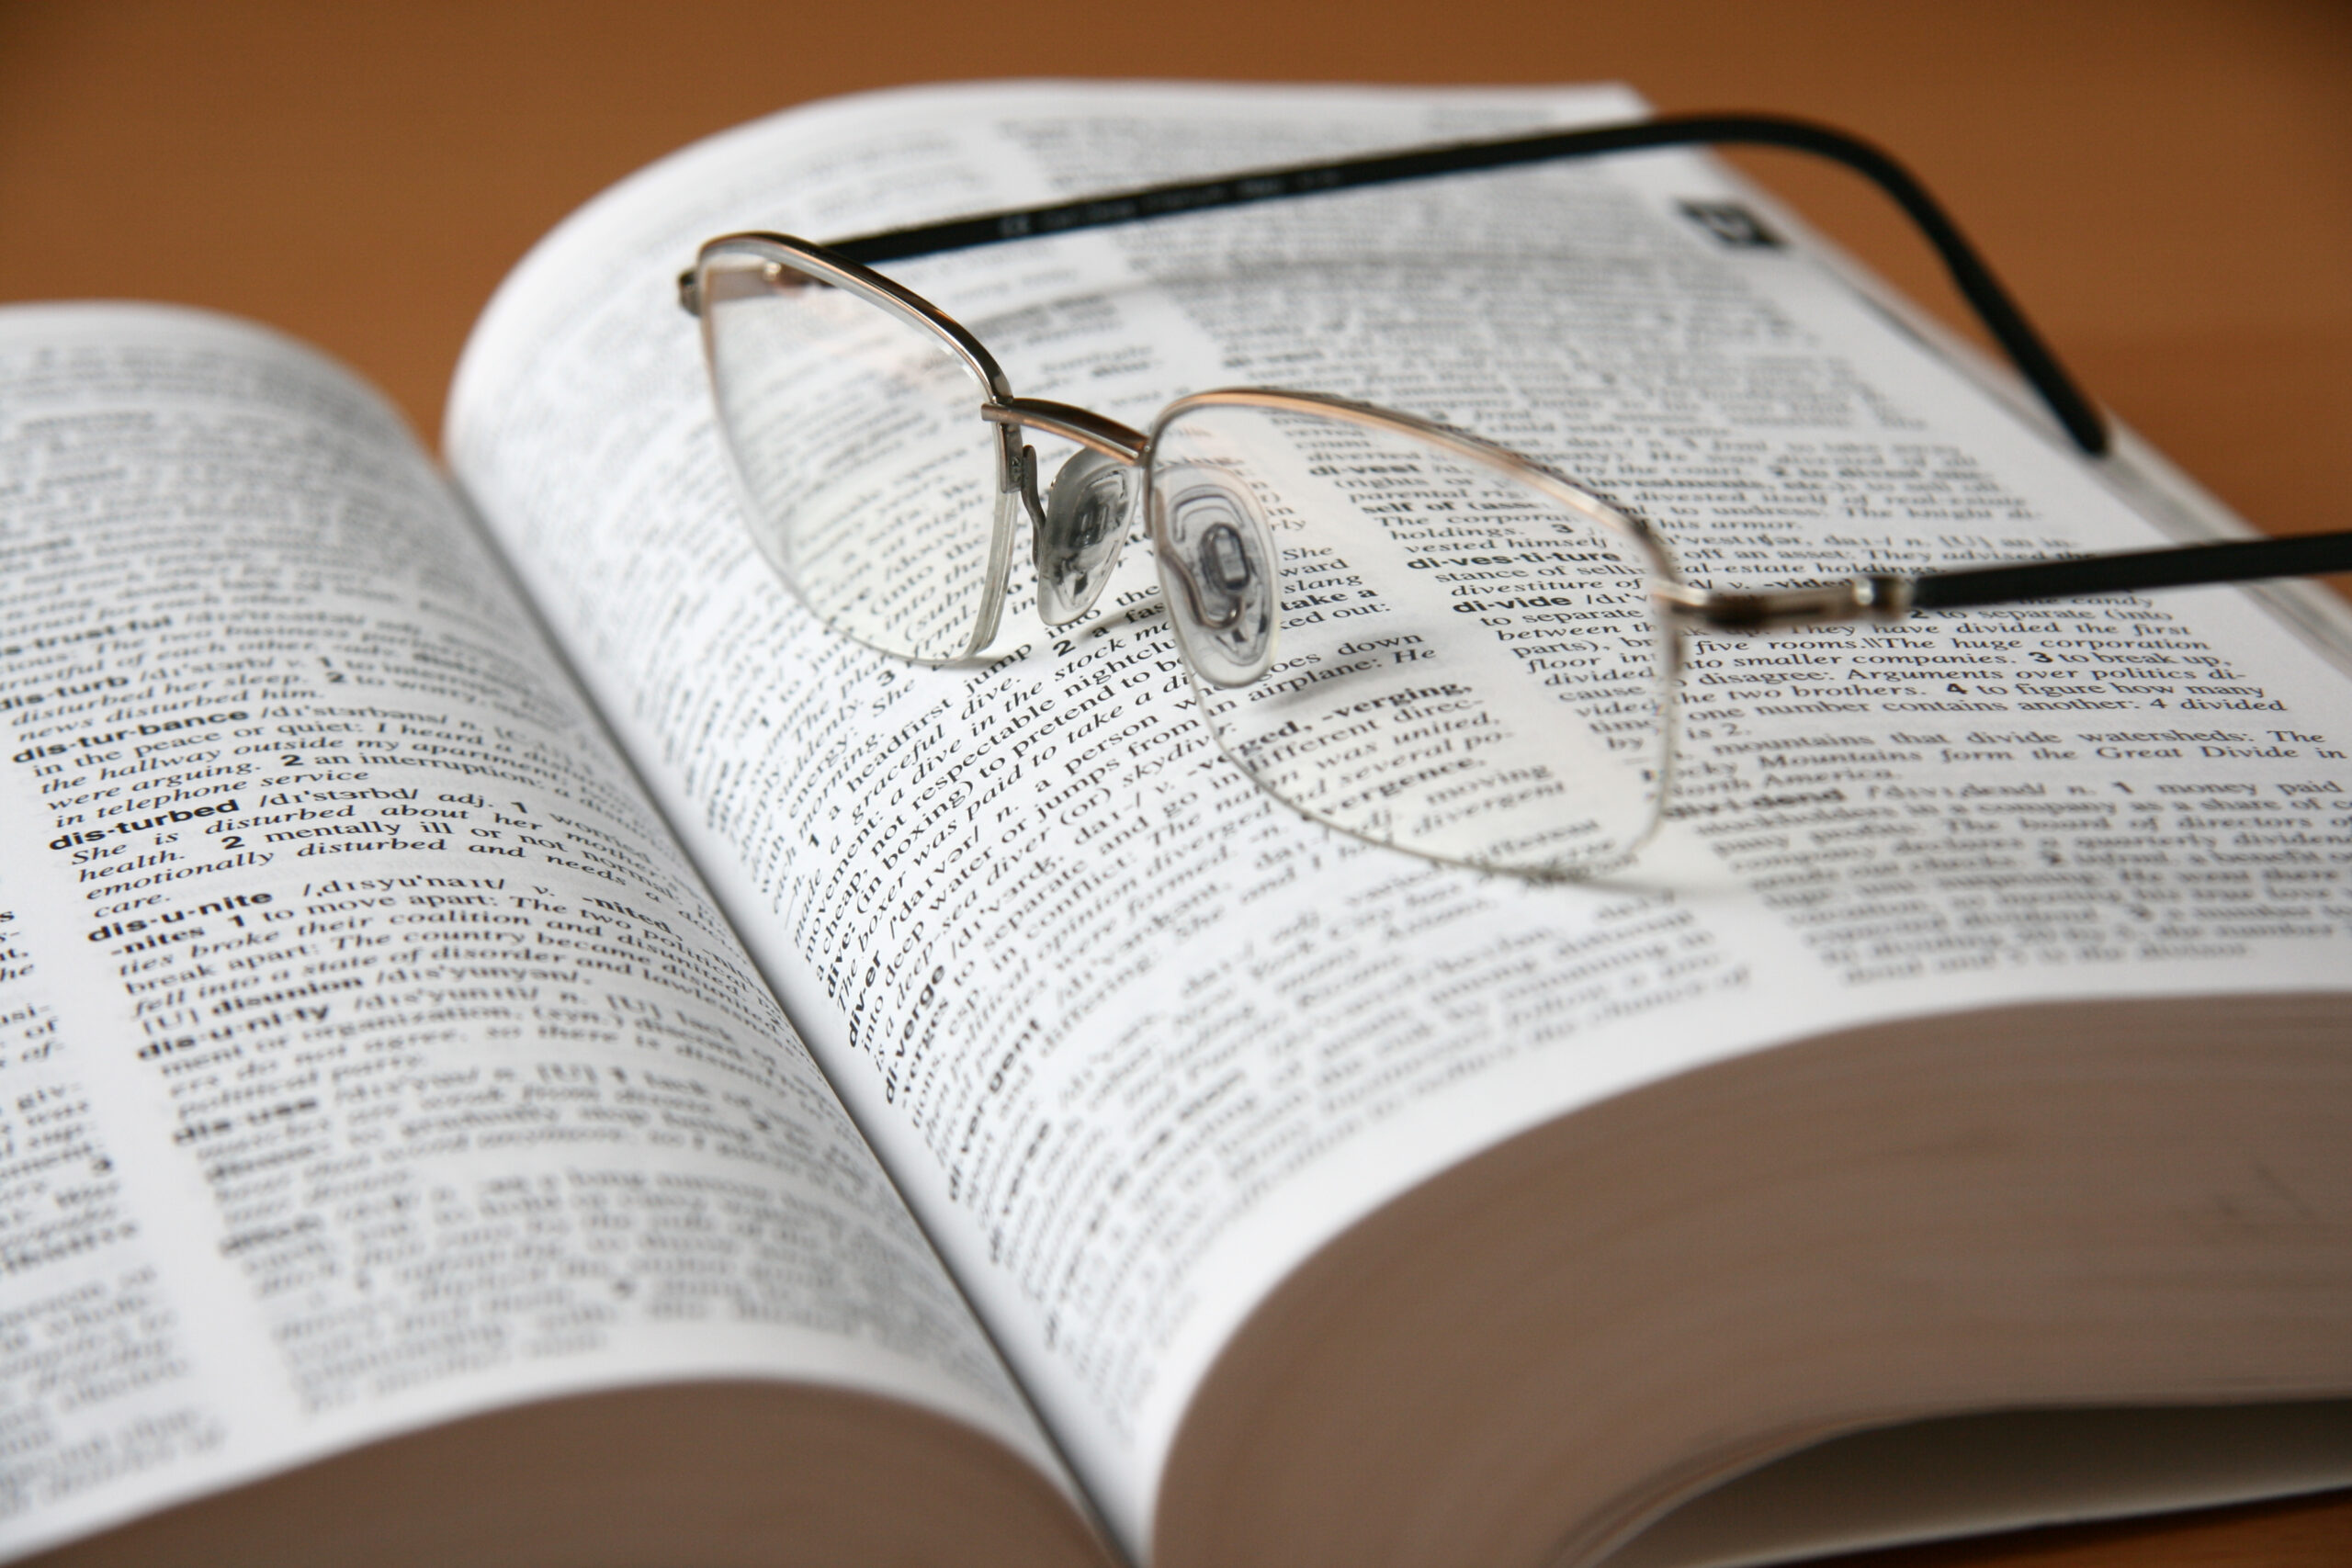 "Eyeglasses and book, learning, study, reading"